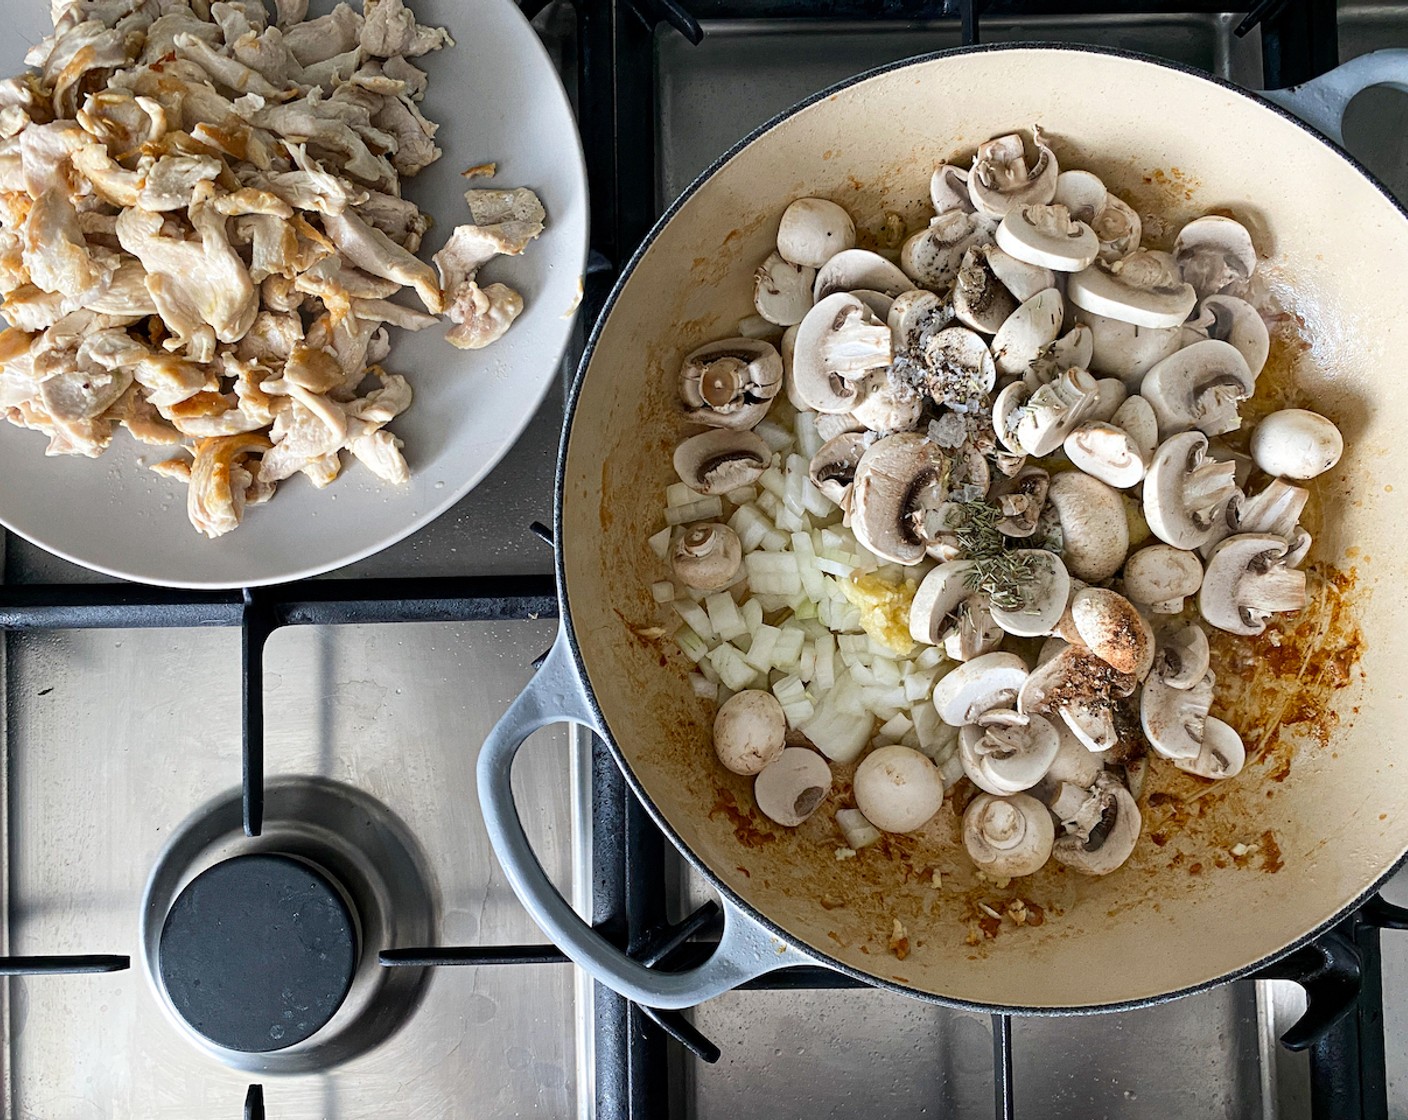 step 4 Add and heat up the Salted Butter (2 Tbsp) and a bit of olive oil. Add the onions, garlic, and mushrooms. Season with Coarse Sea Salt (1 tsp), Freshly Ground Black Pepper (1 tsp), Dried Rosemary (1 tsp), and Ground Nutmeg (1/2 tsp), and sauté until browned and softened.